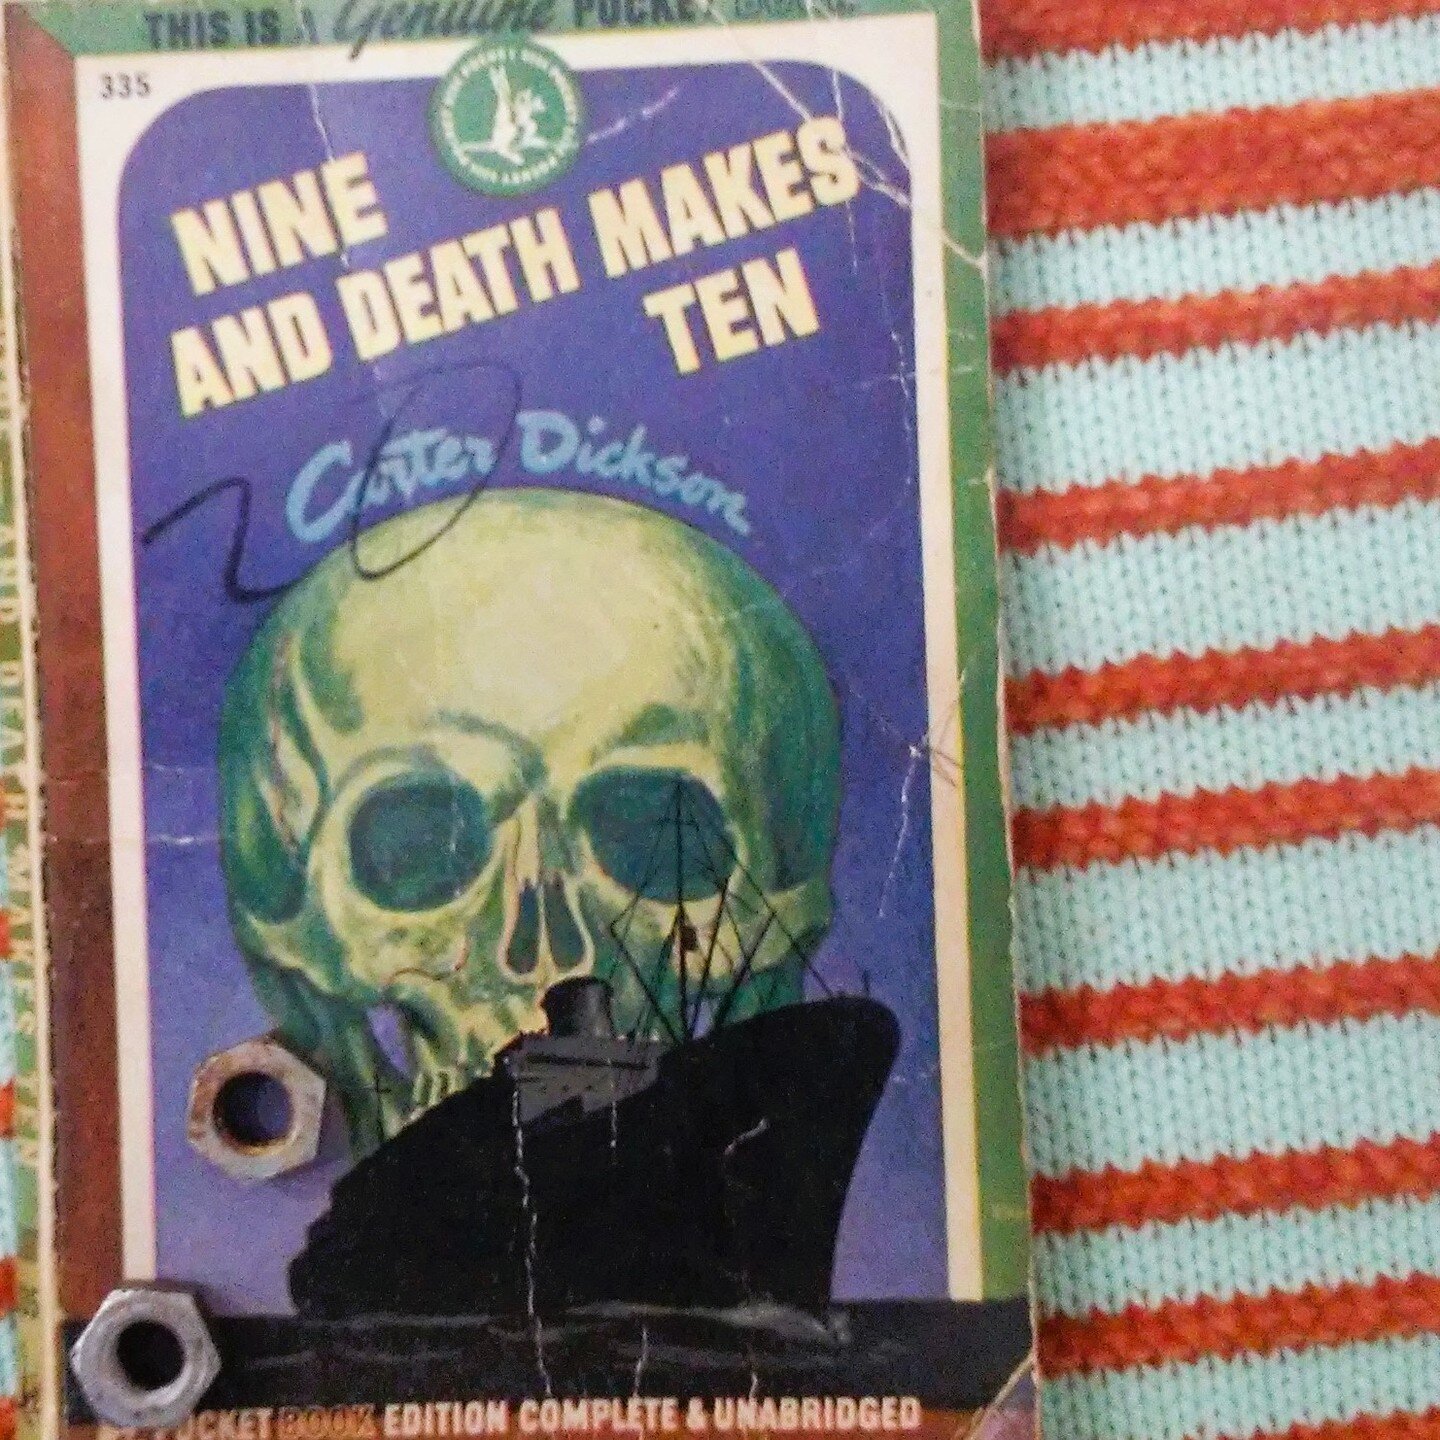 Nine and Death Makes Ten by Carter Dickson

THIS IS A Genuine POCKET BOOK

POCKET BOOK EDITION COMPLETE &amp; UNABRIDGED

Share this book with someone in uniform.

KIND TO YOUR POCKET AND YOUR POCKETBOOK

#greatcover
#greatcoverprettygoodbook
#carter